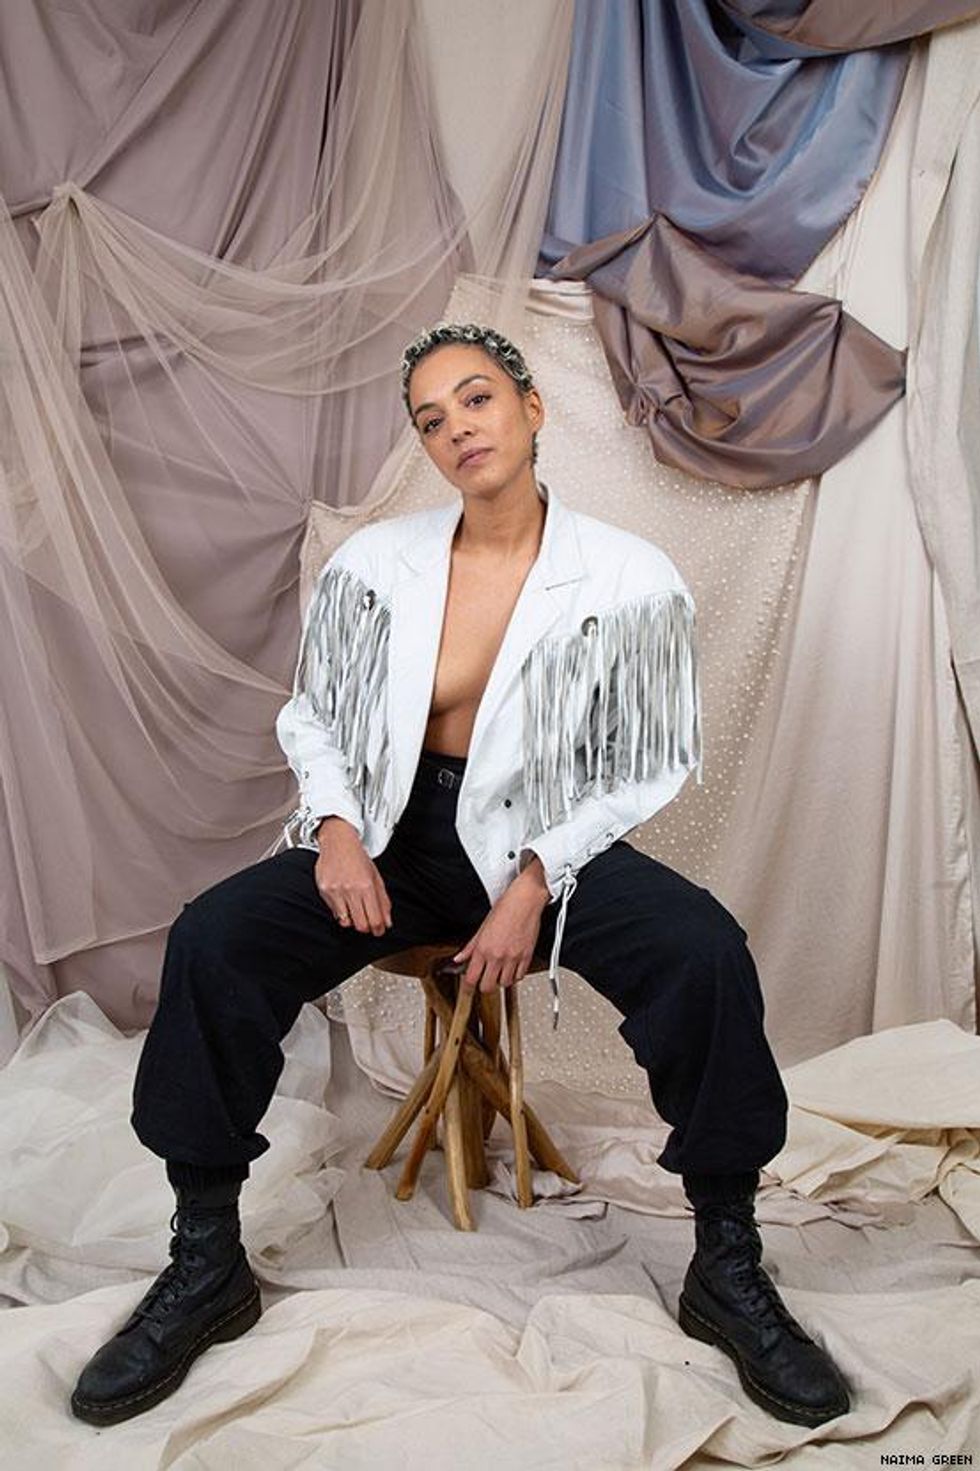 Naima Green is making Pur*suit, a playing card deck of queer and trans women and people of color from Brooklyn.